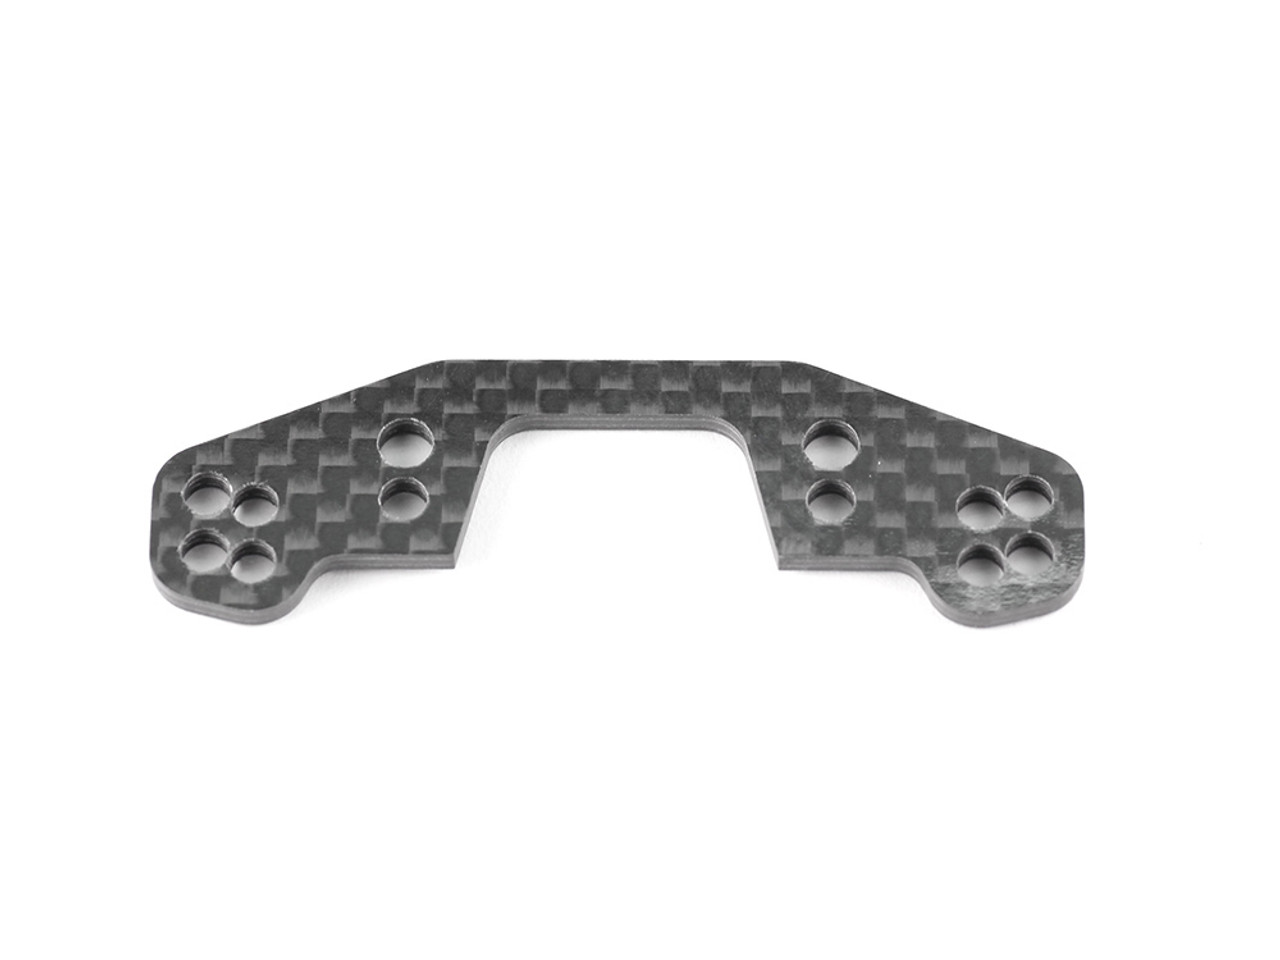 REAR UPPER SUSPENSION PLATE (for A-ARM) (IF15)